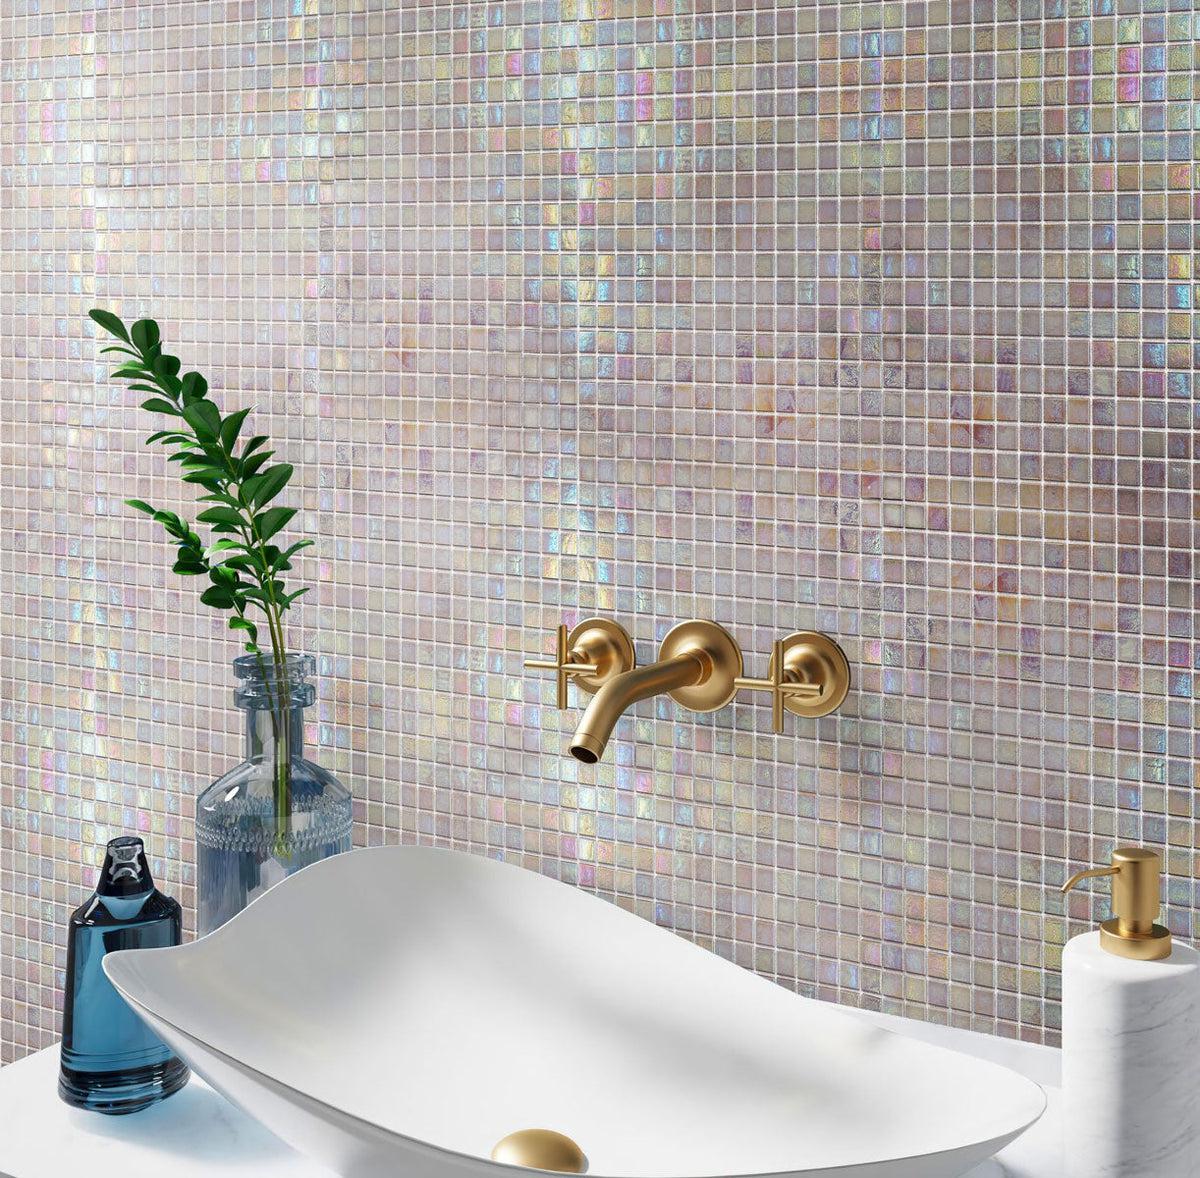 Bathroom backsplash covered with Abalone Pearl Squares Glass Pool Tile mosaic